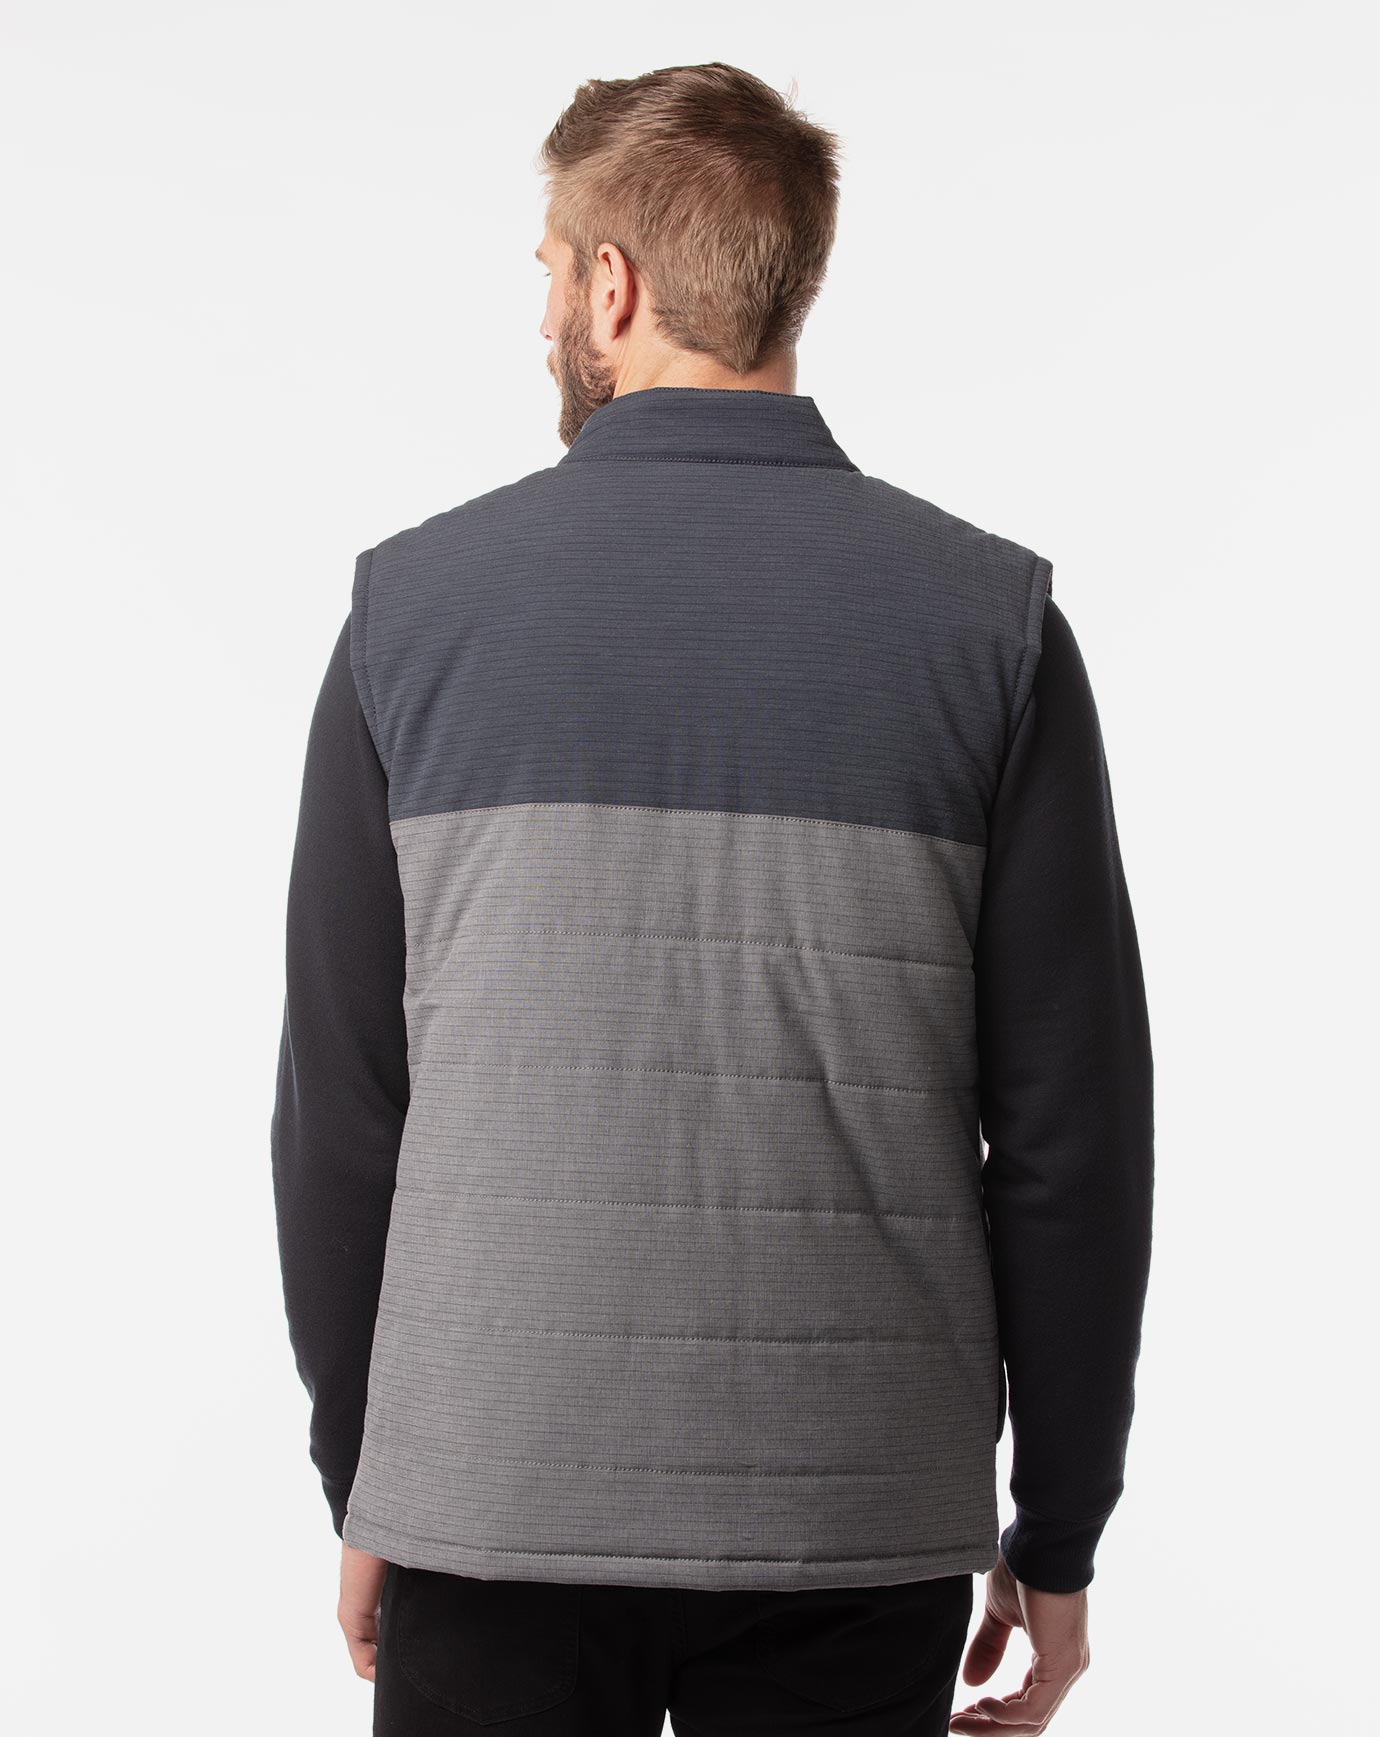 EASY OUT VEST Image Thumbnail 3